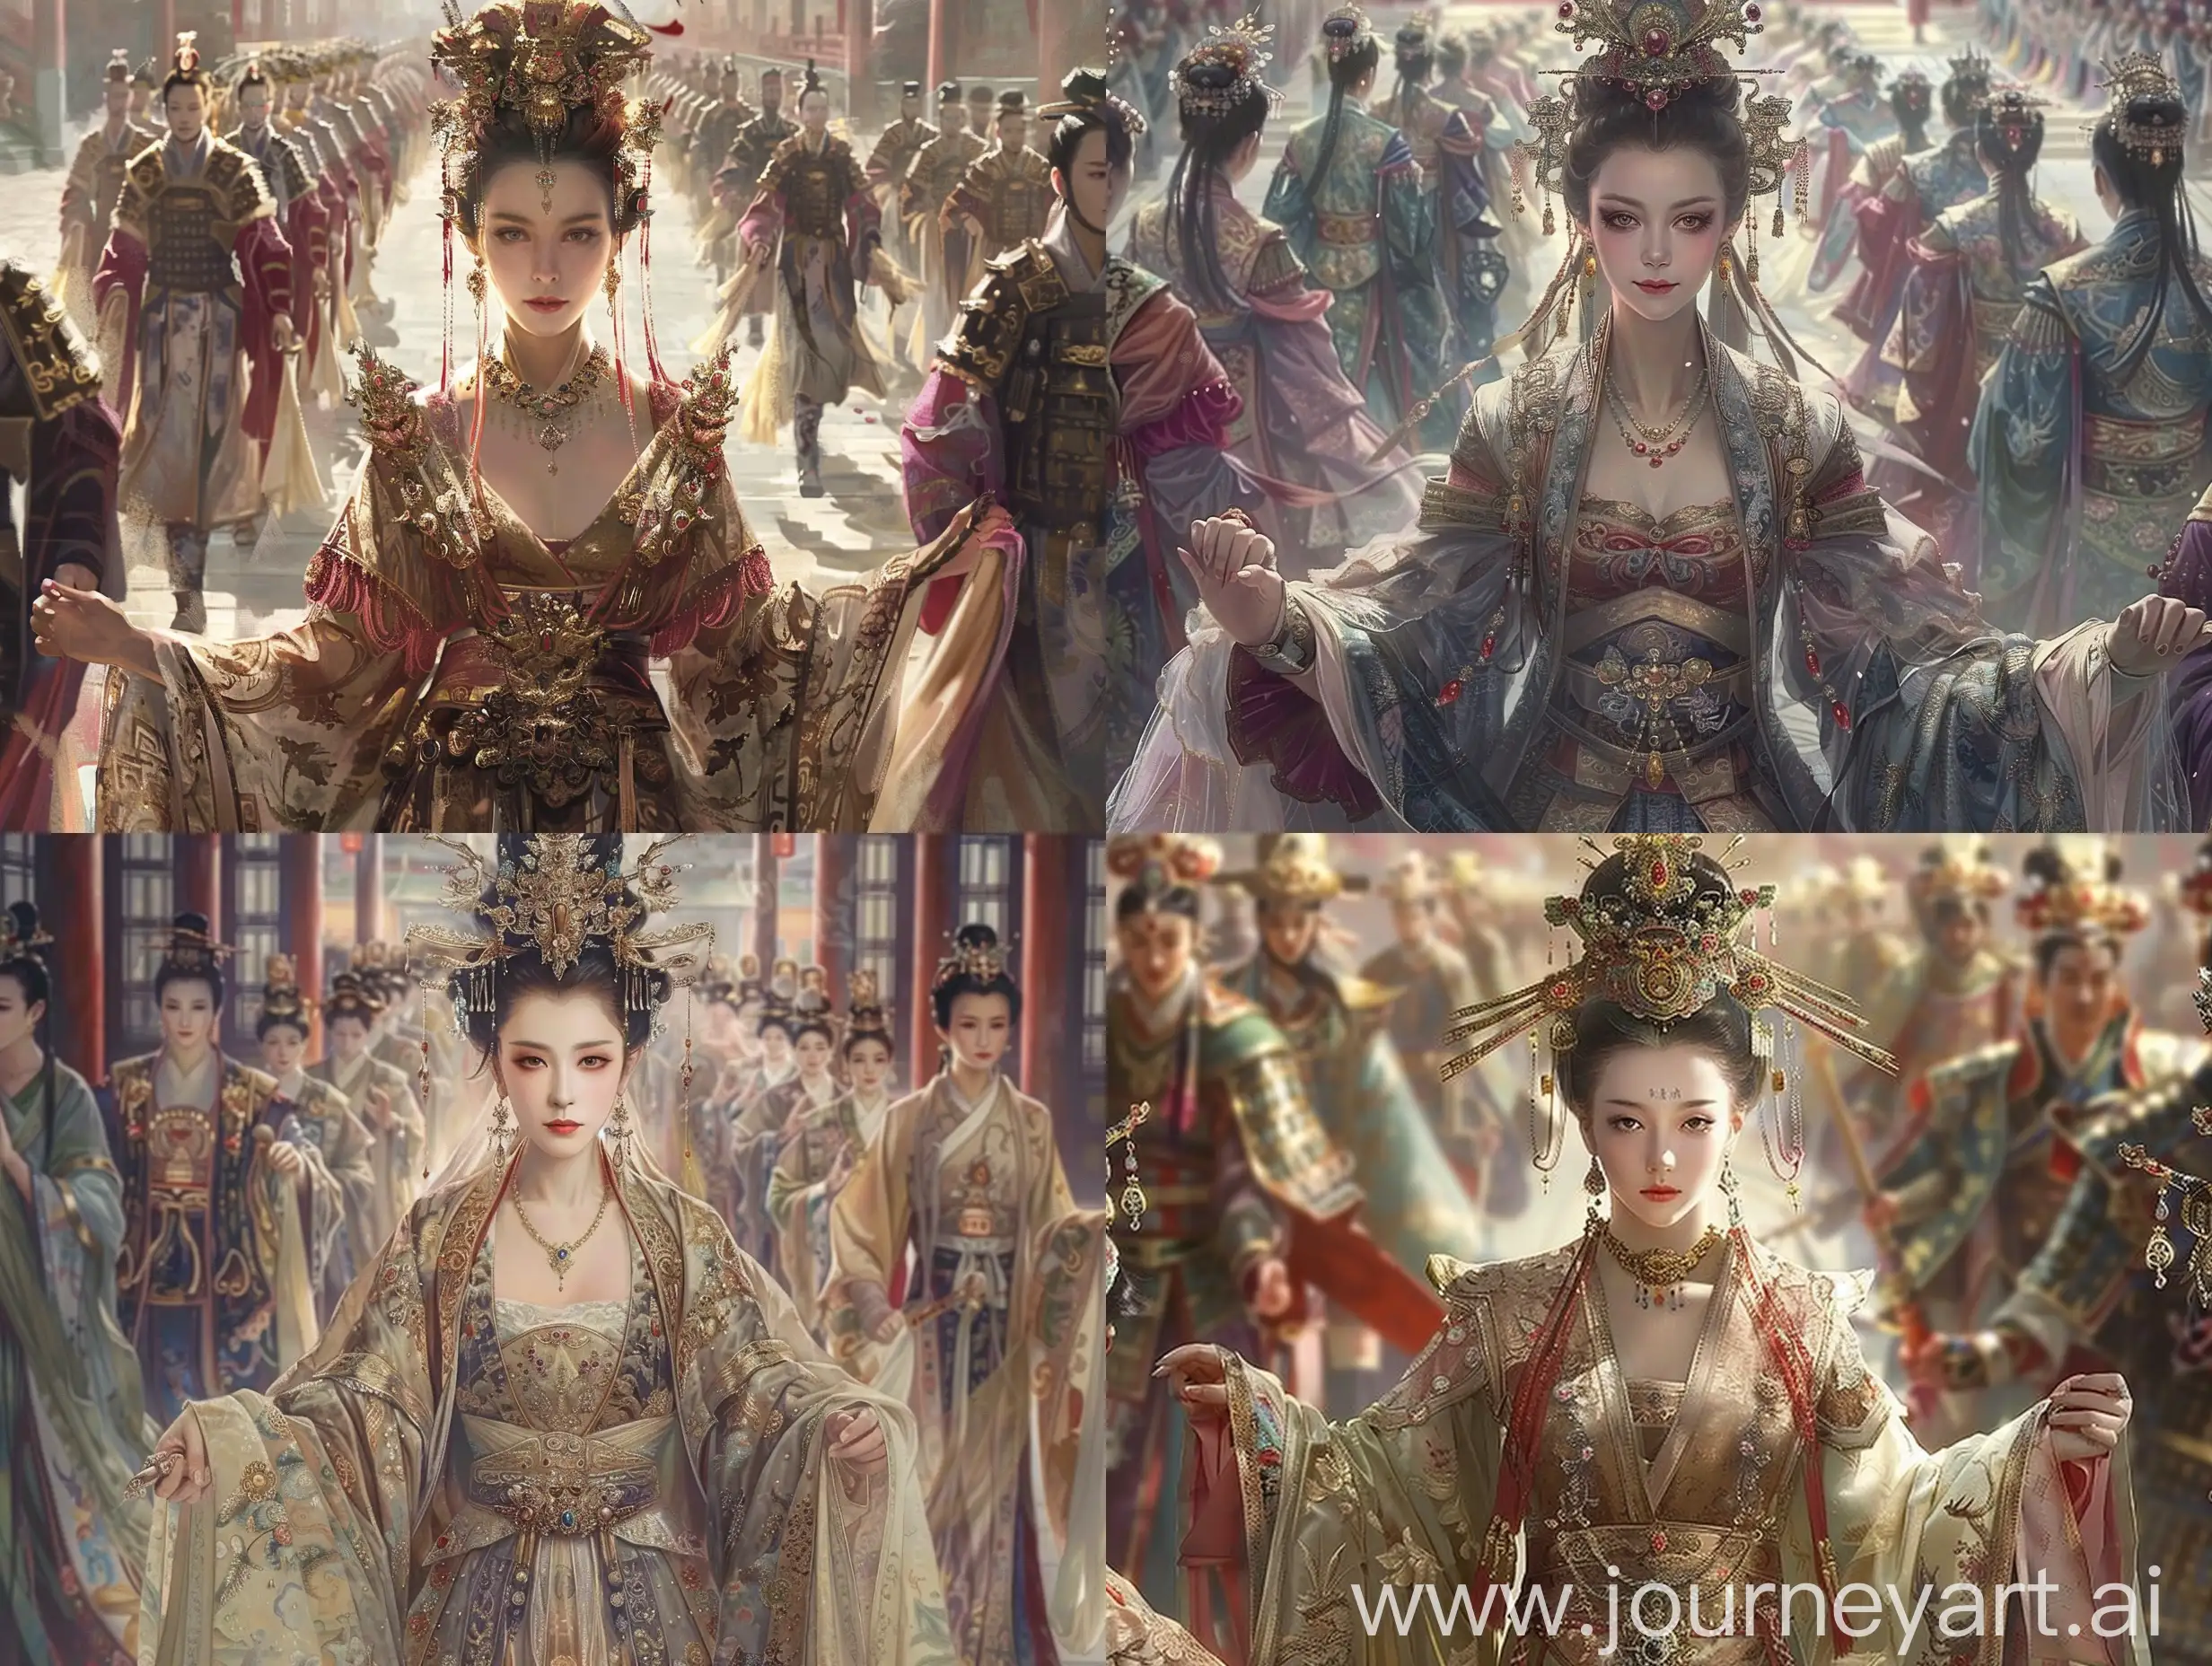 Majestic-Chinese-Empress-Procession-Luxurious-Beauty-in-Ancient-Splendor